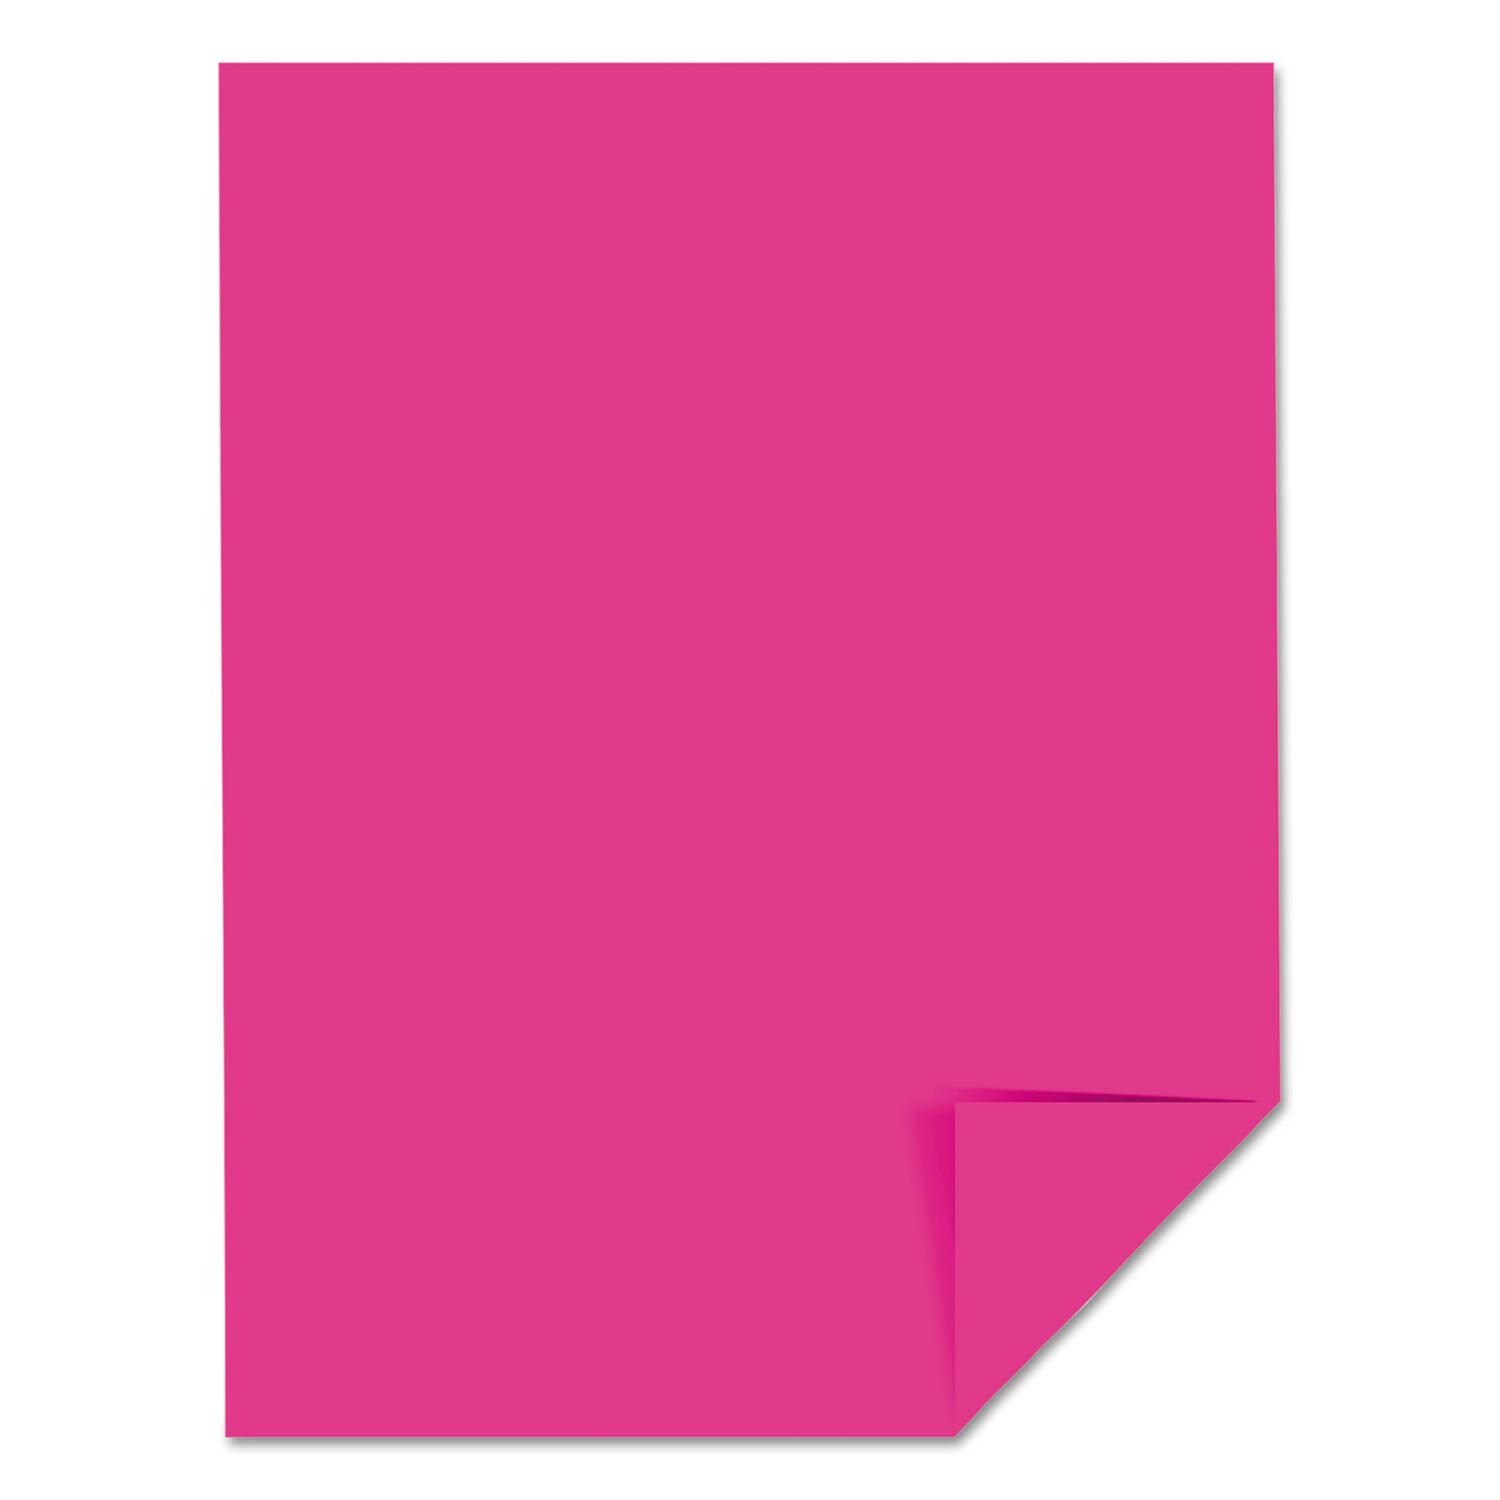 Color Cardstock, 65 lb Cover Weight, 8.5 x 11, Fireball Fuchsia, 250/Pack - 